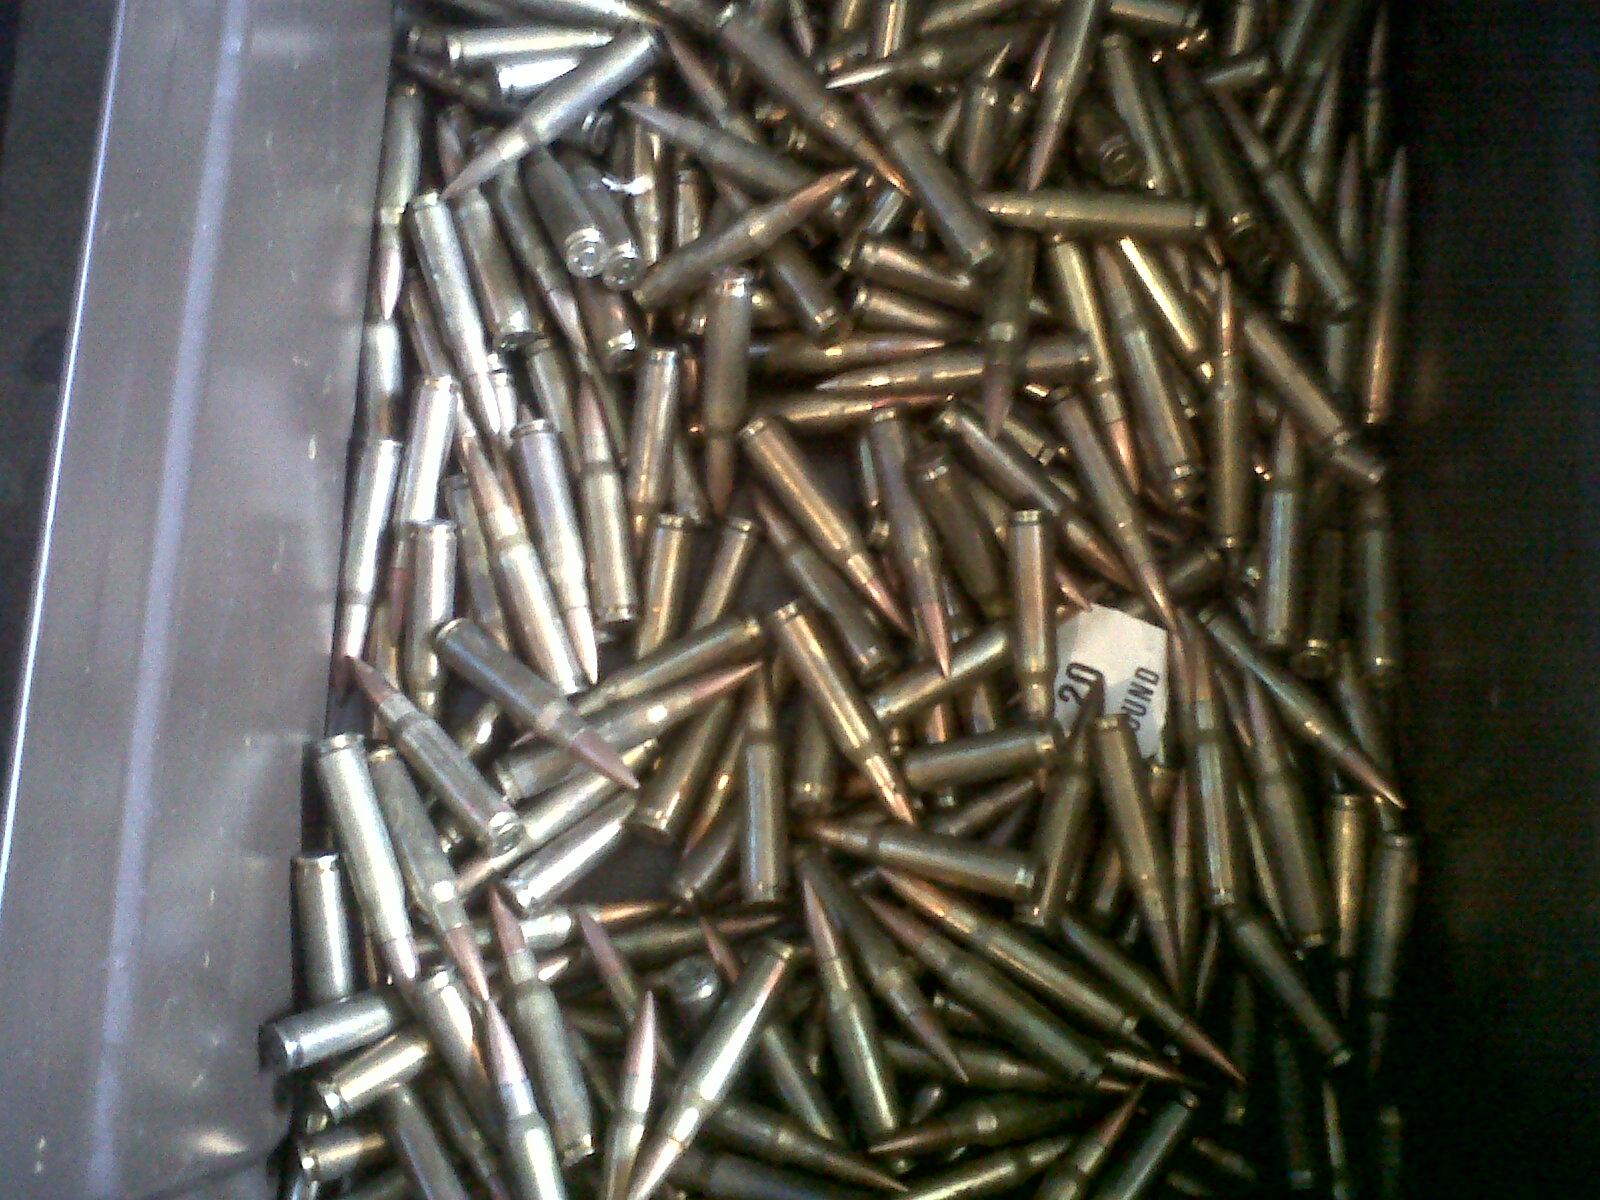 steel cased ammo in m1a